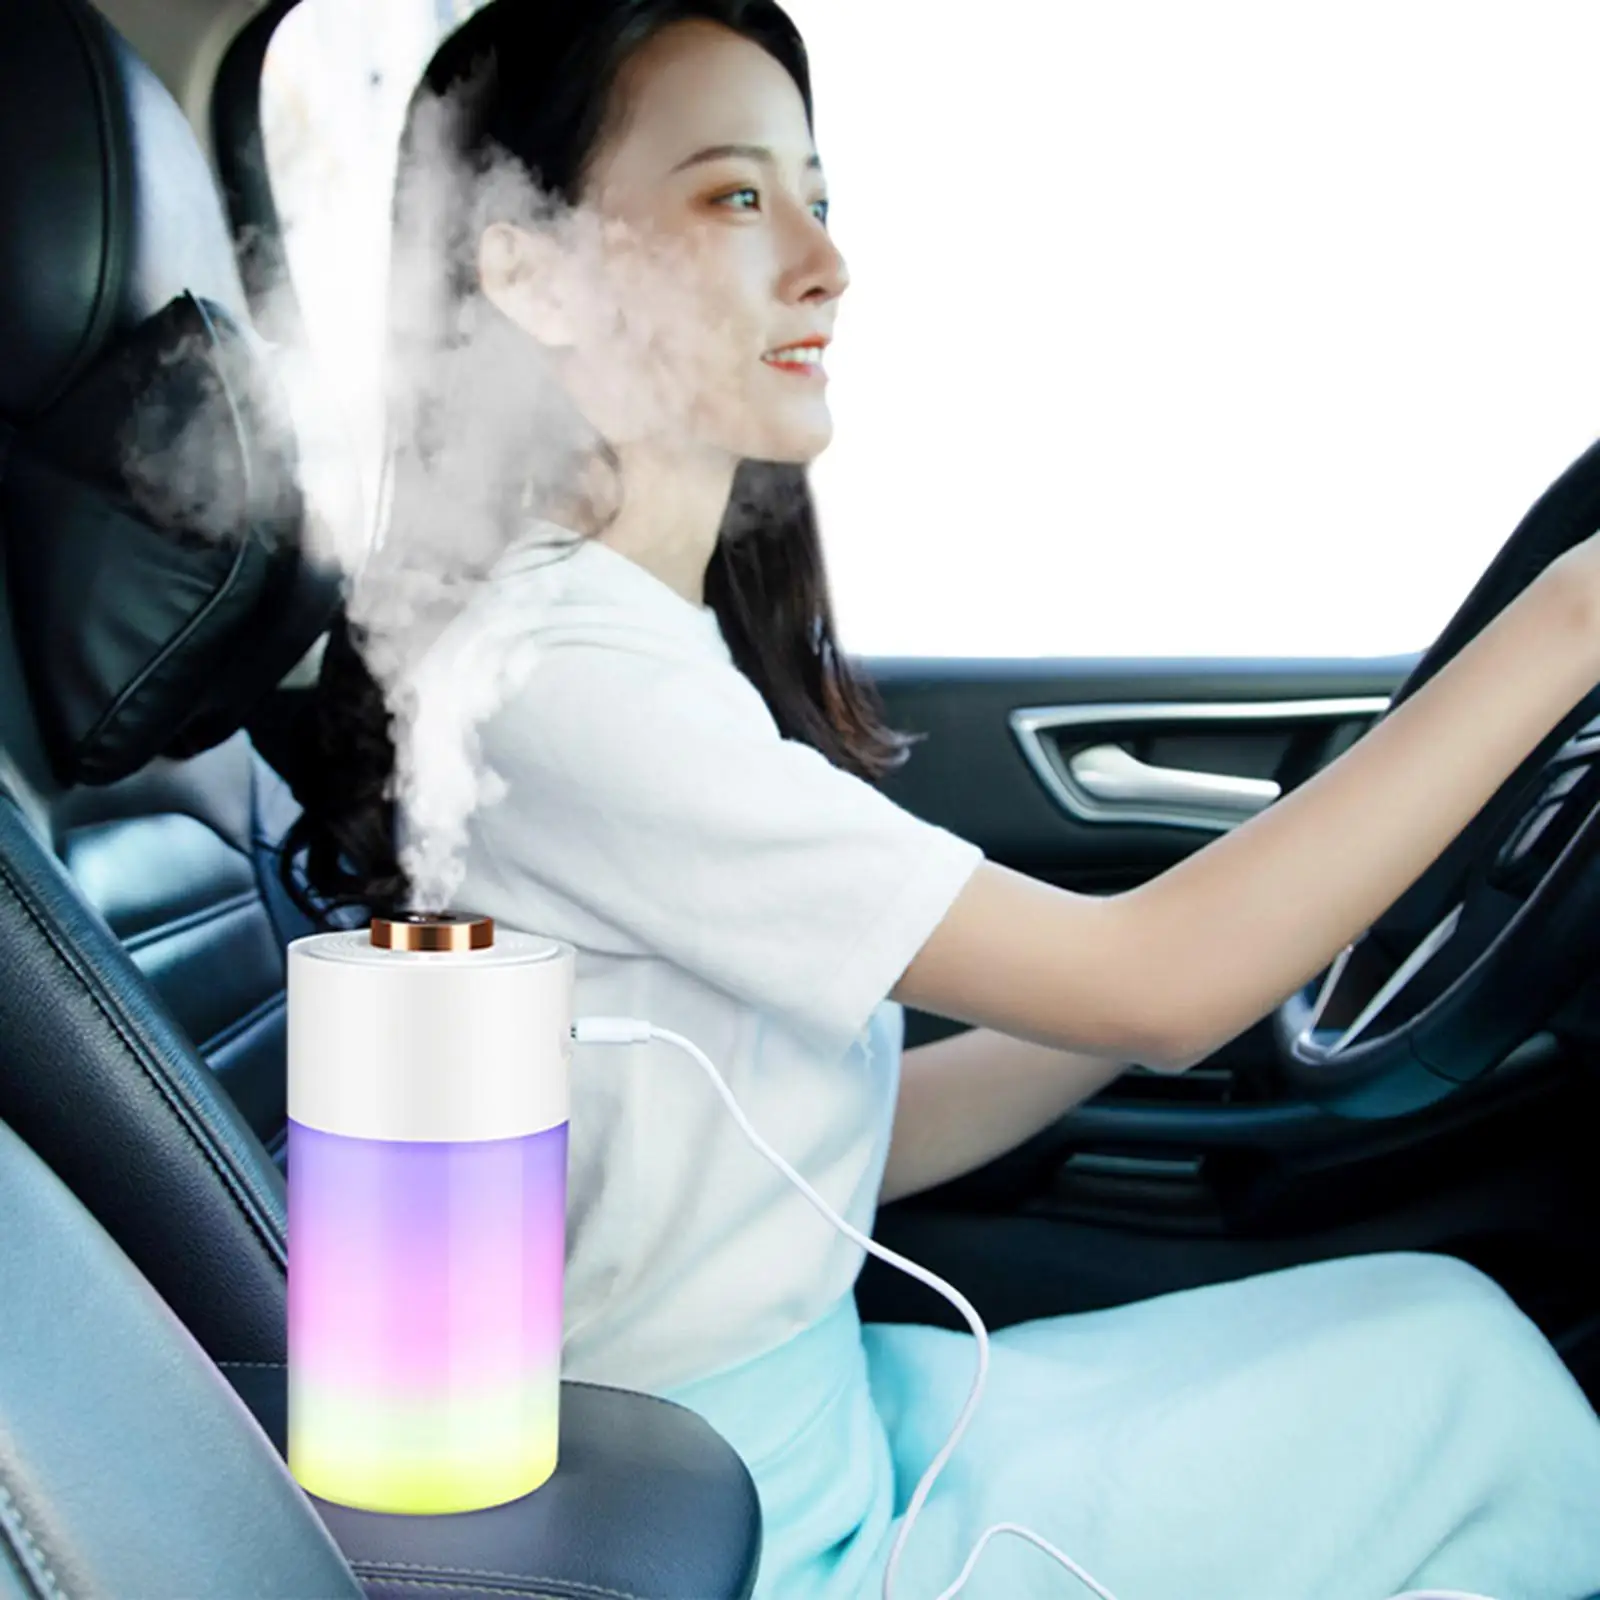 Portable Mist Humidifier Diffuser Quiet USB LED Ultrasonic Atomizer Purifier for Desk